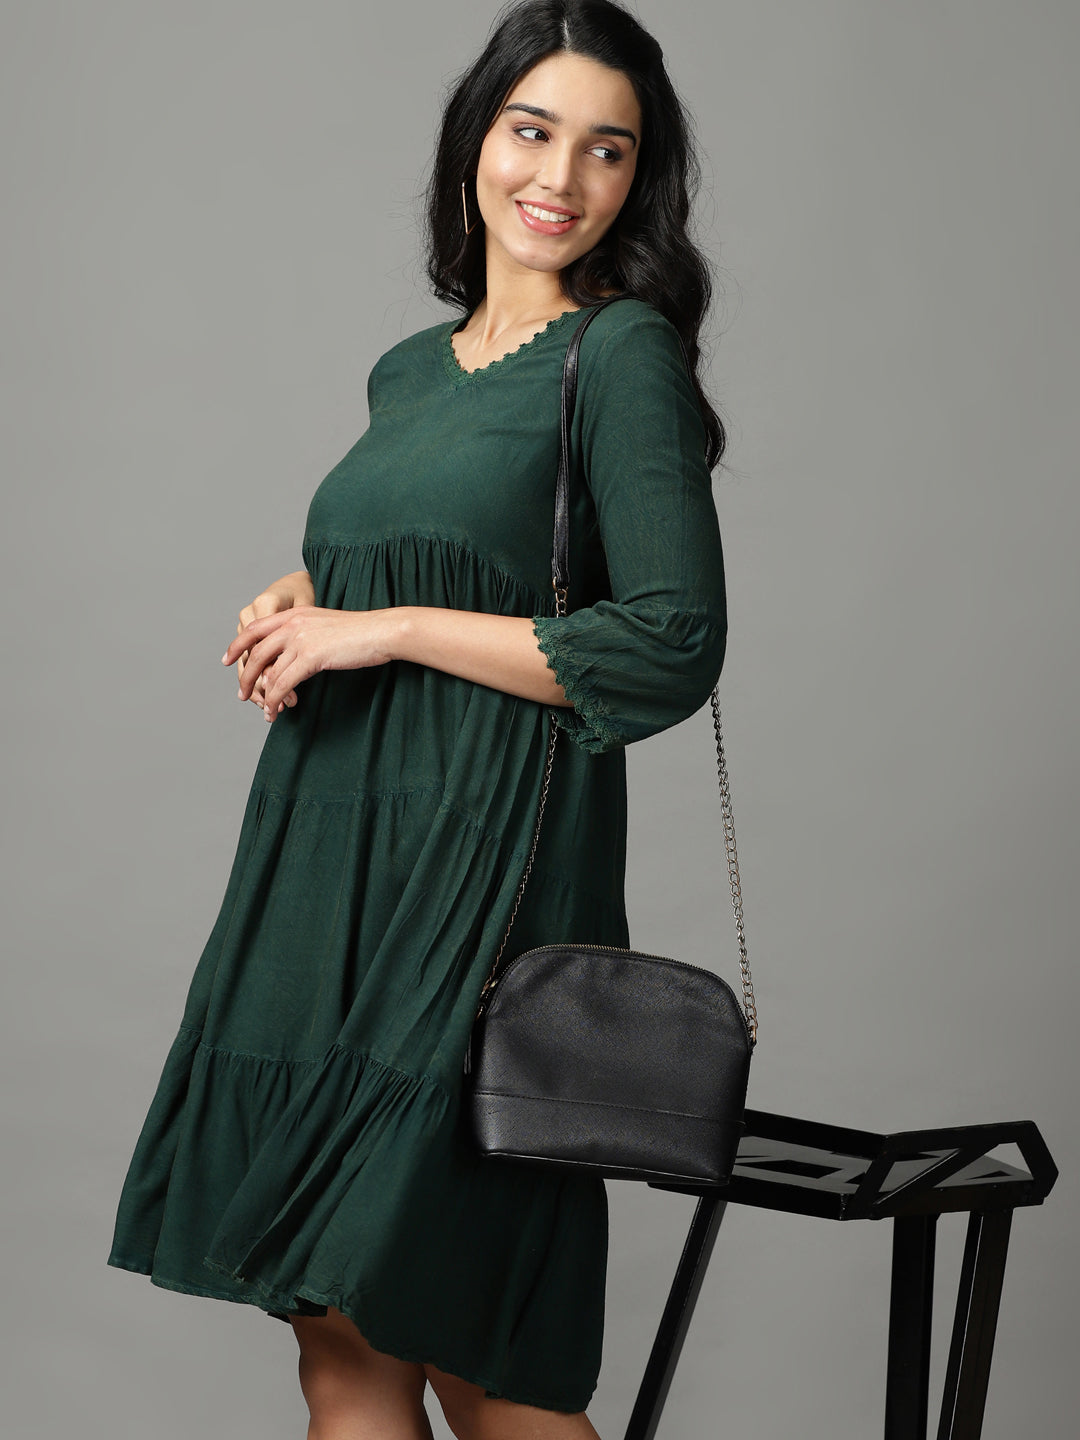 Women's Olive Solid Empire Dress